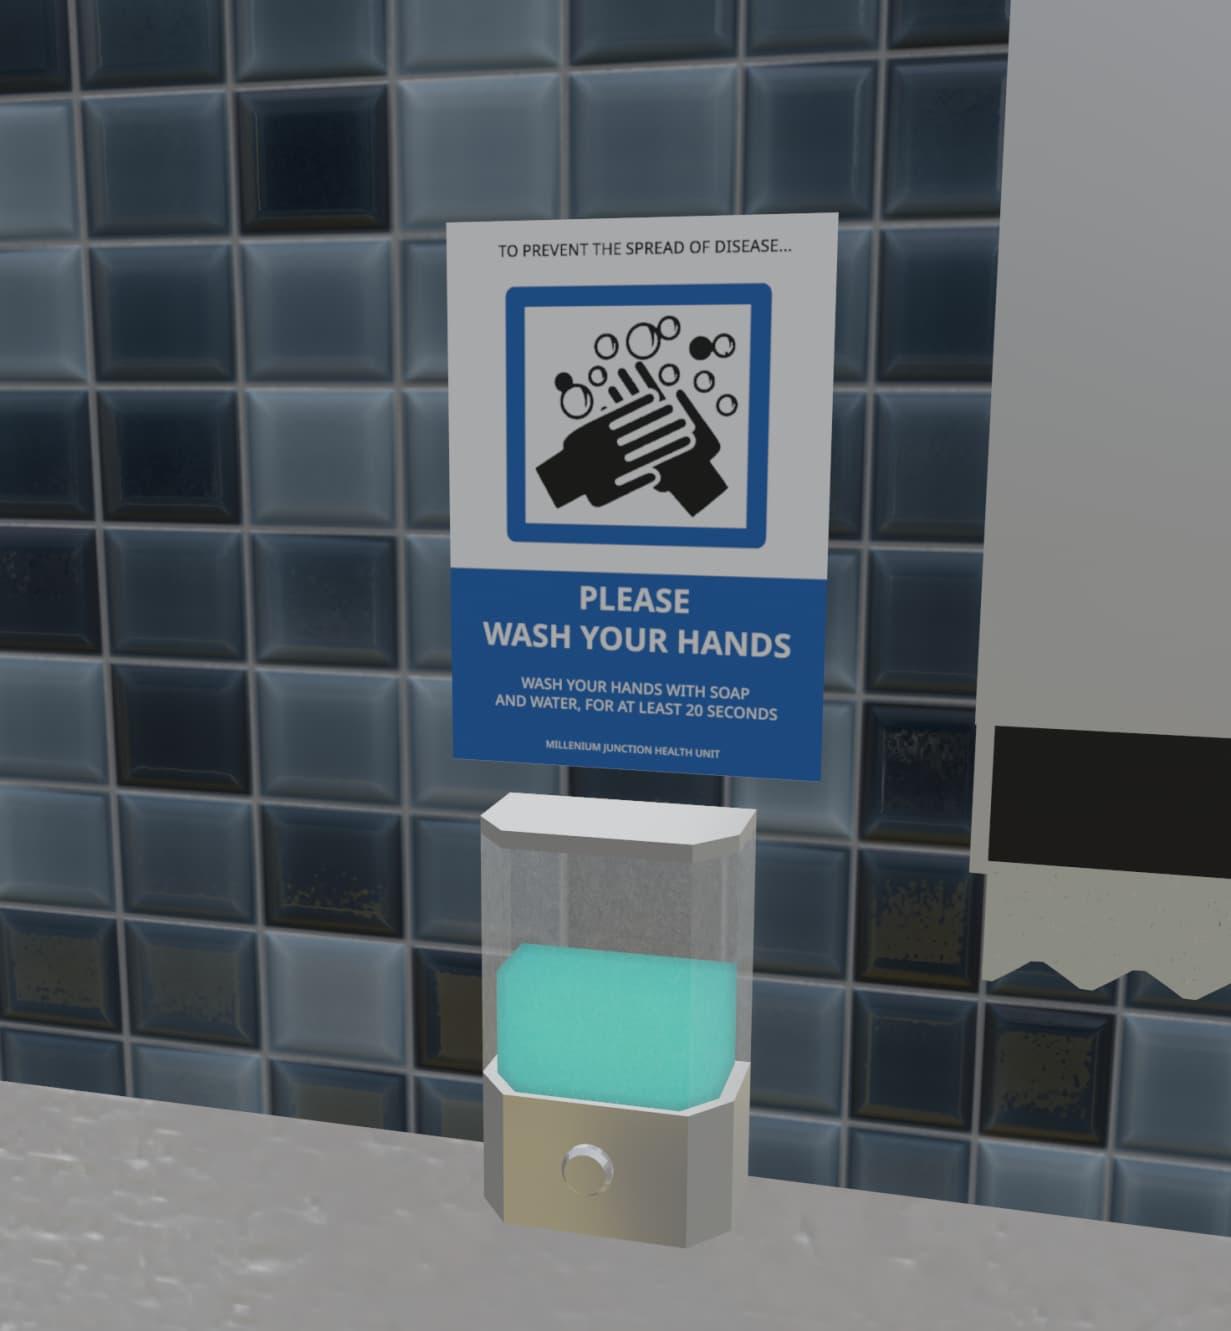 A sign that says "Please wash your hands" above a soap dispenser with green liquid inside